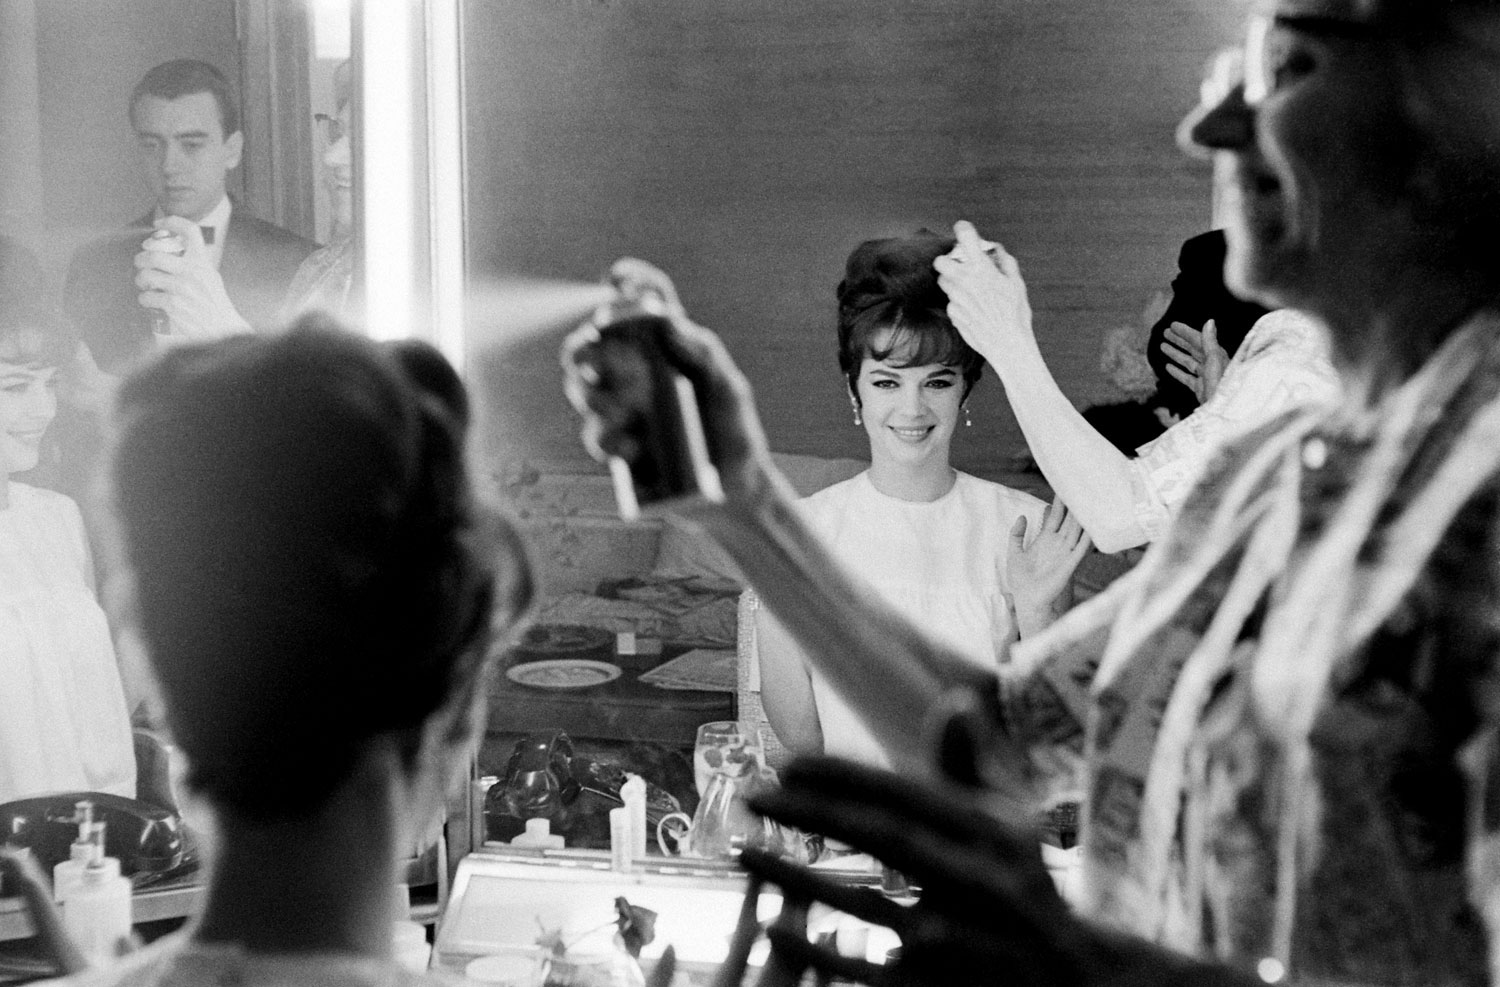 Natalie Wood gets the final touches on her updo with hair spray before the Academy Awards in April 1962.